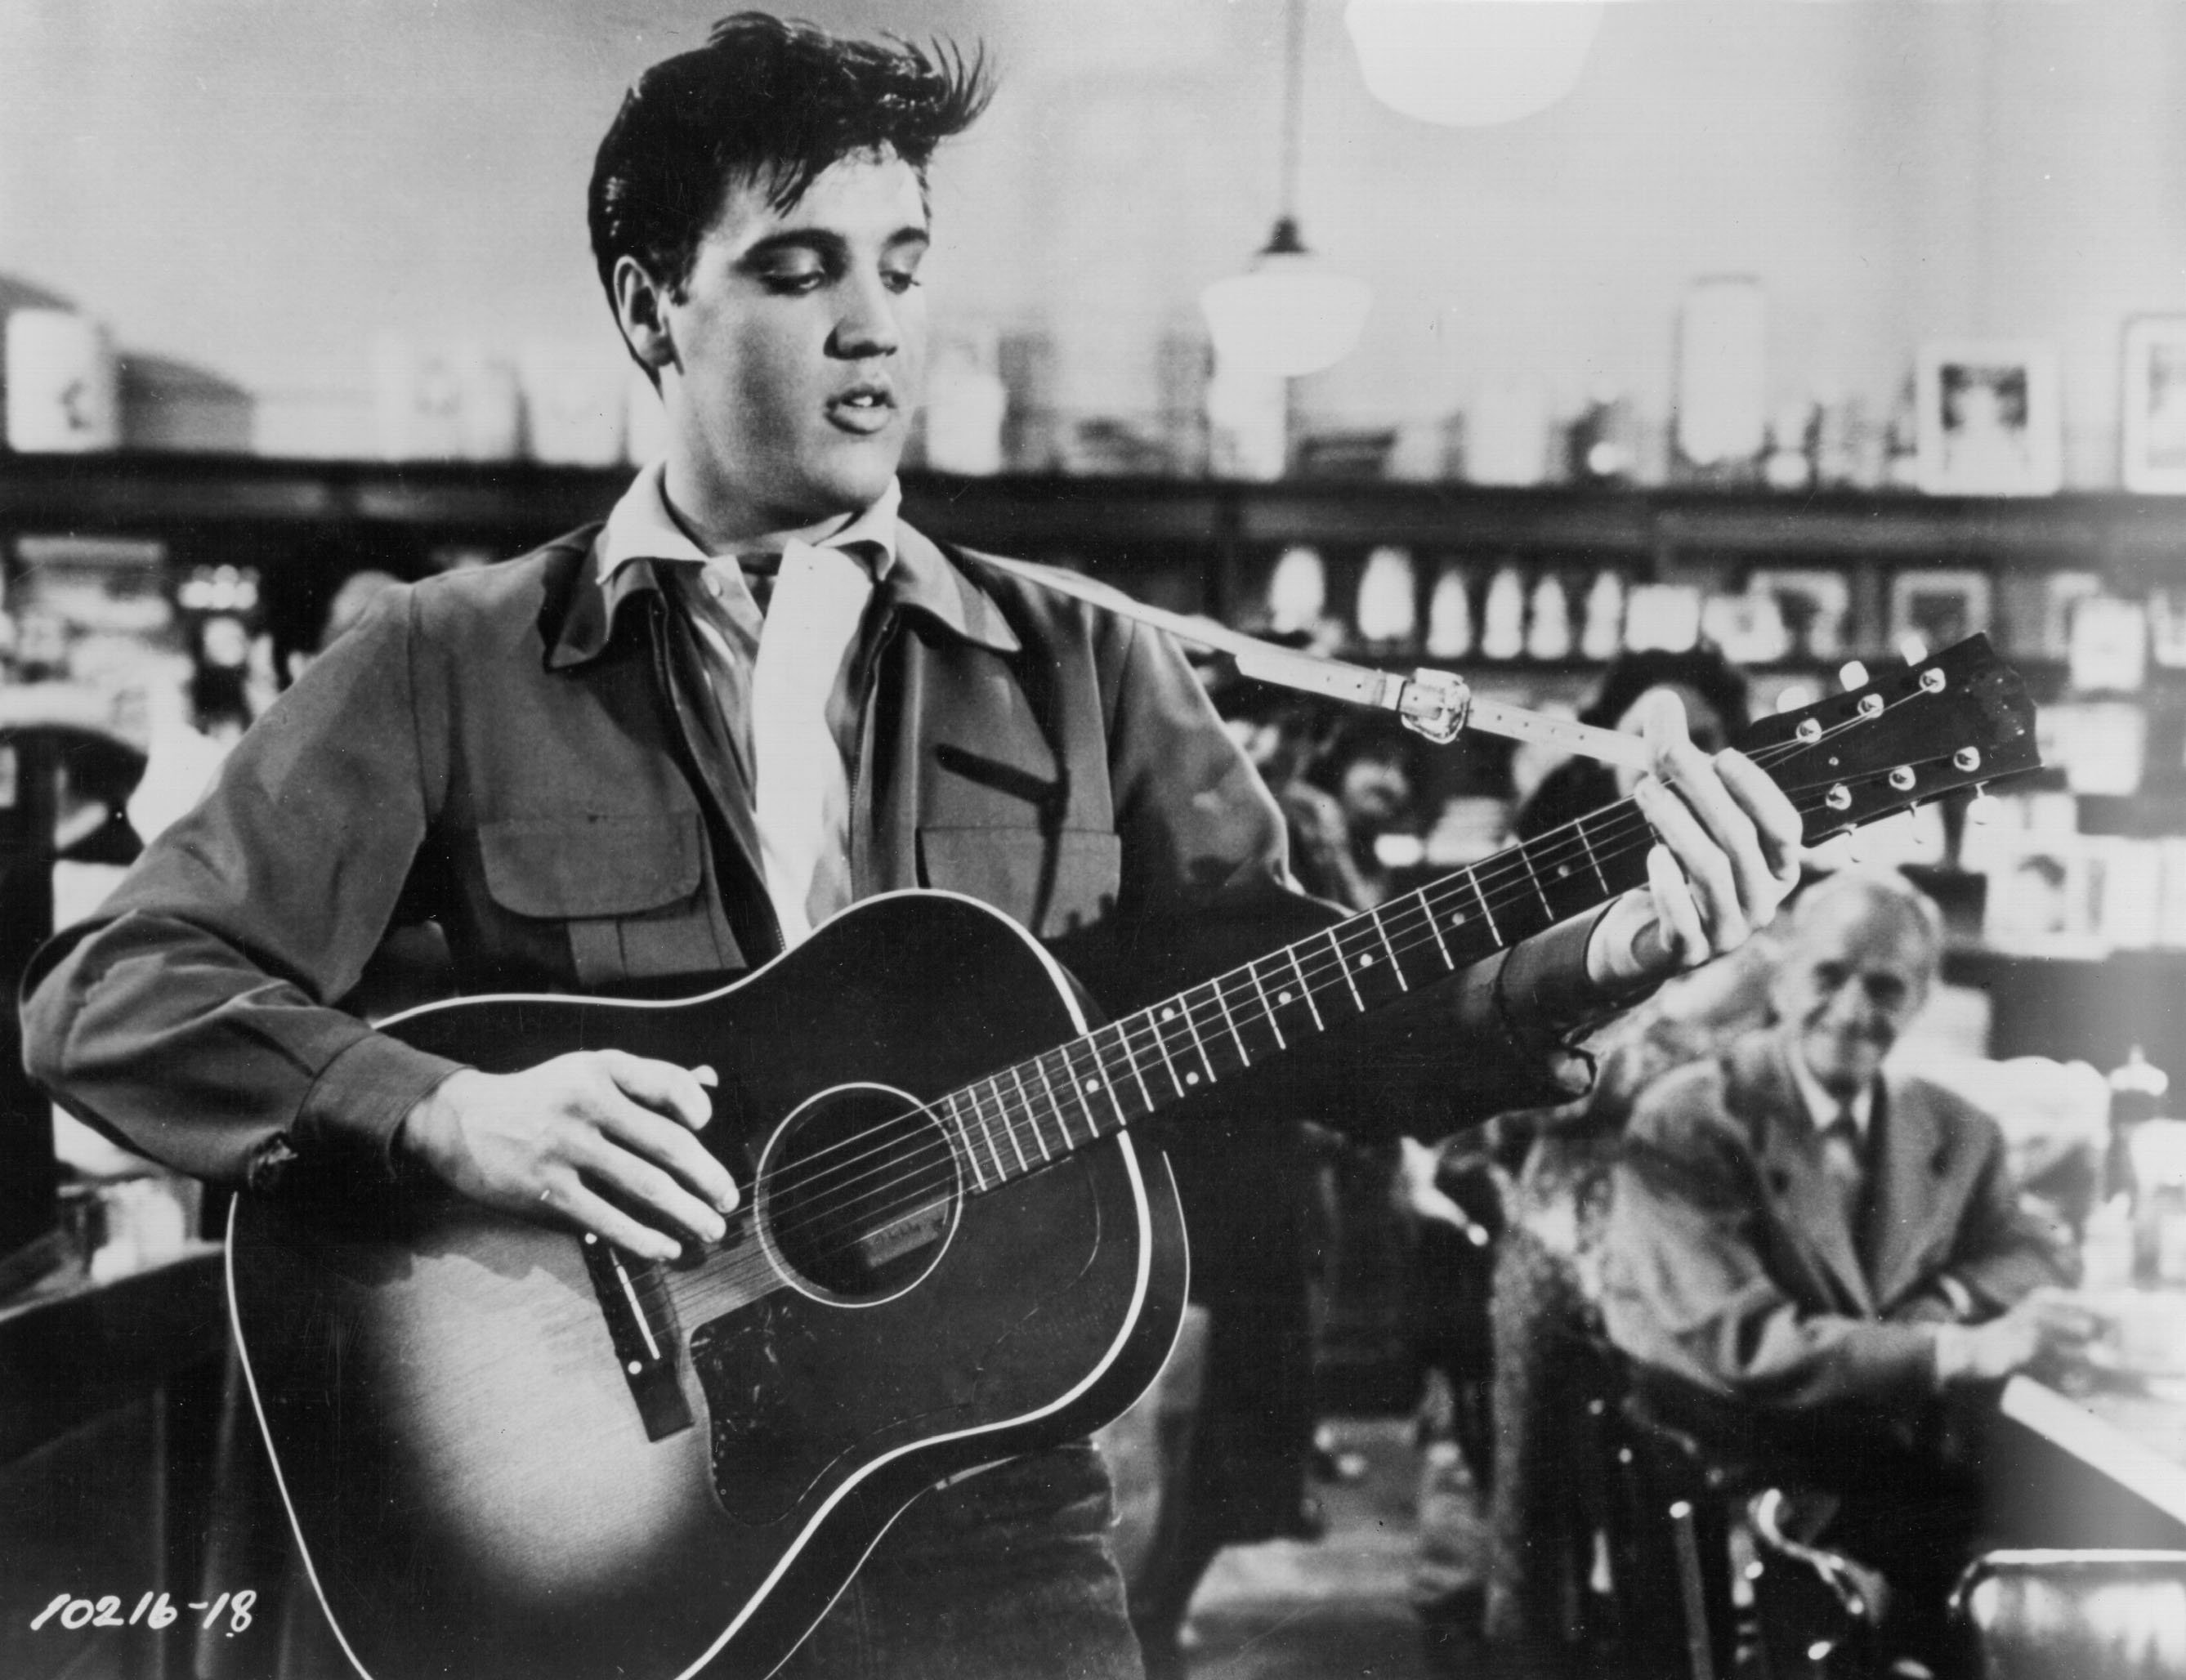 Elvis Presley playing one of his songs on a guitar